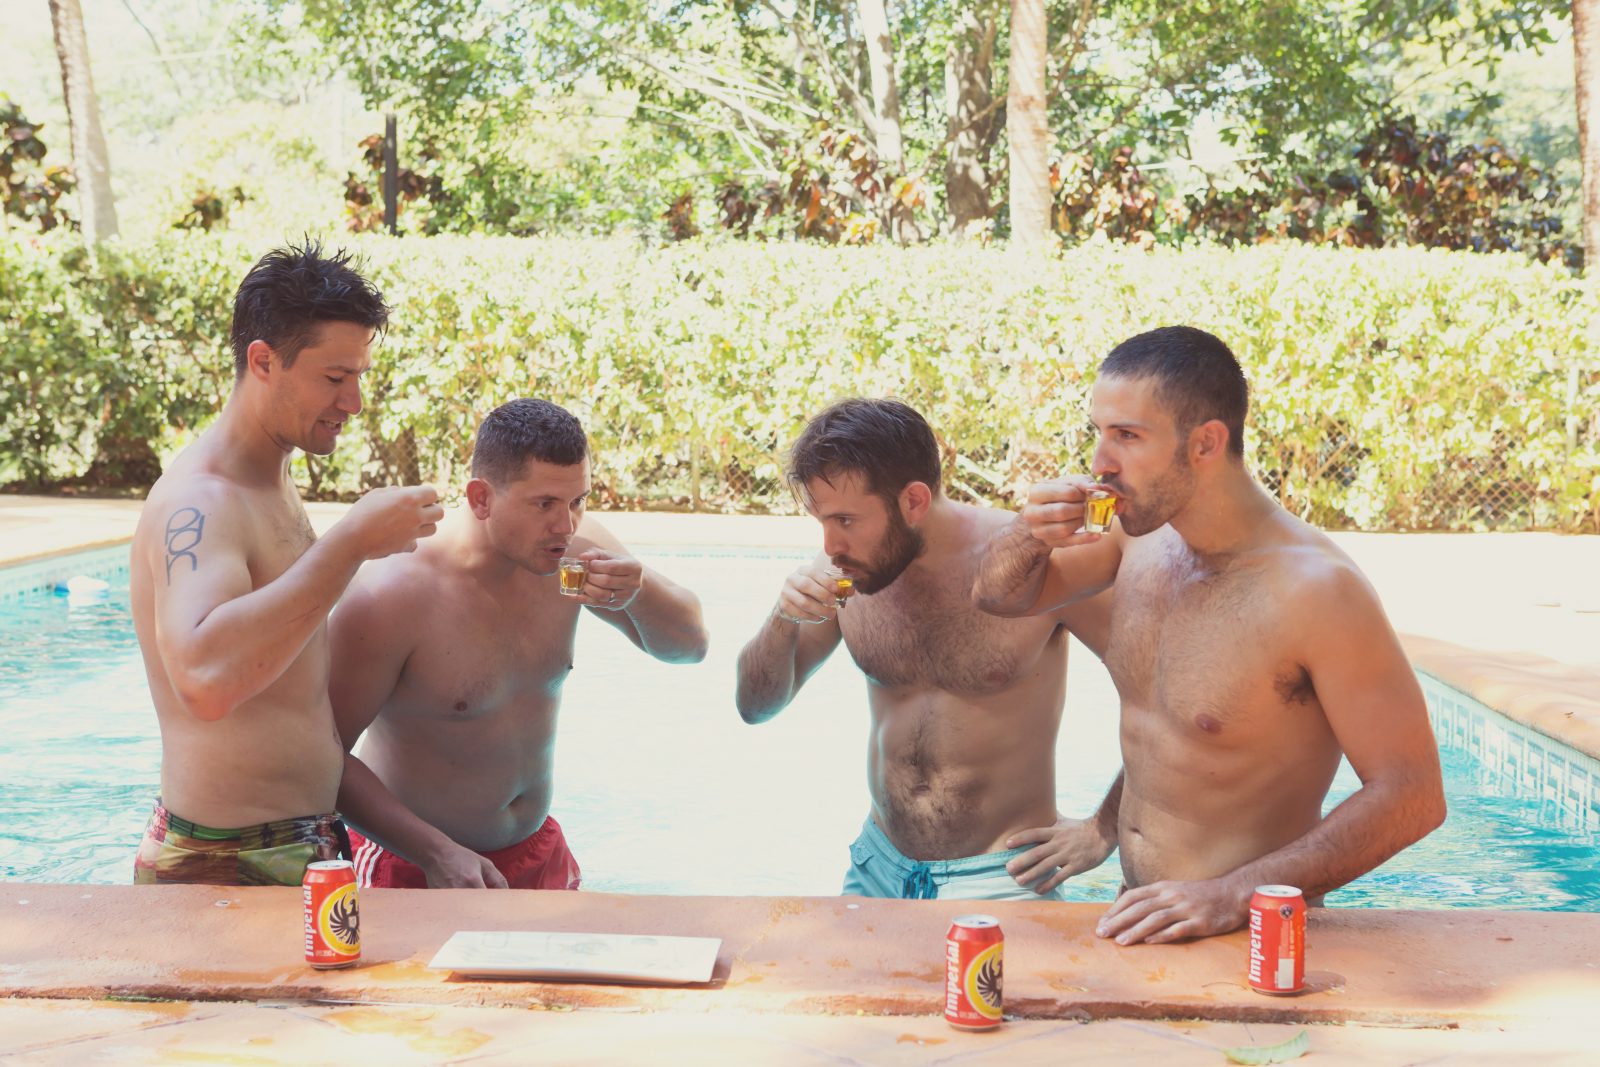 Max and his groomsmen taking shots in the pool. Wedding. Costa Rica